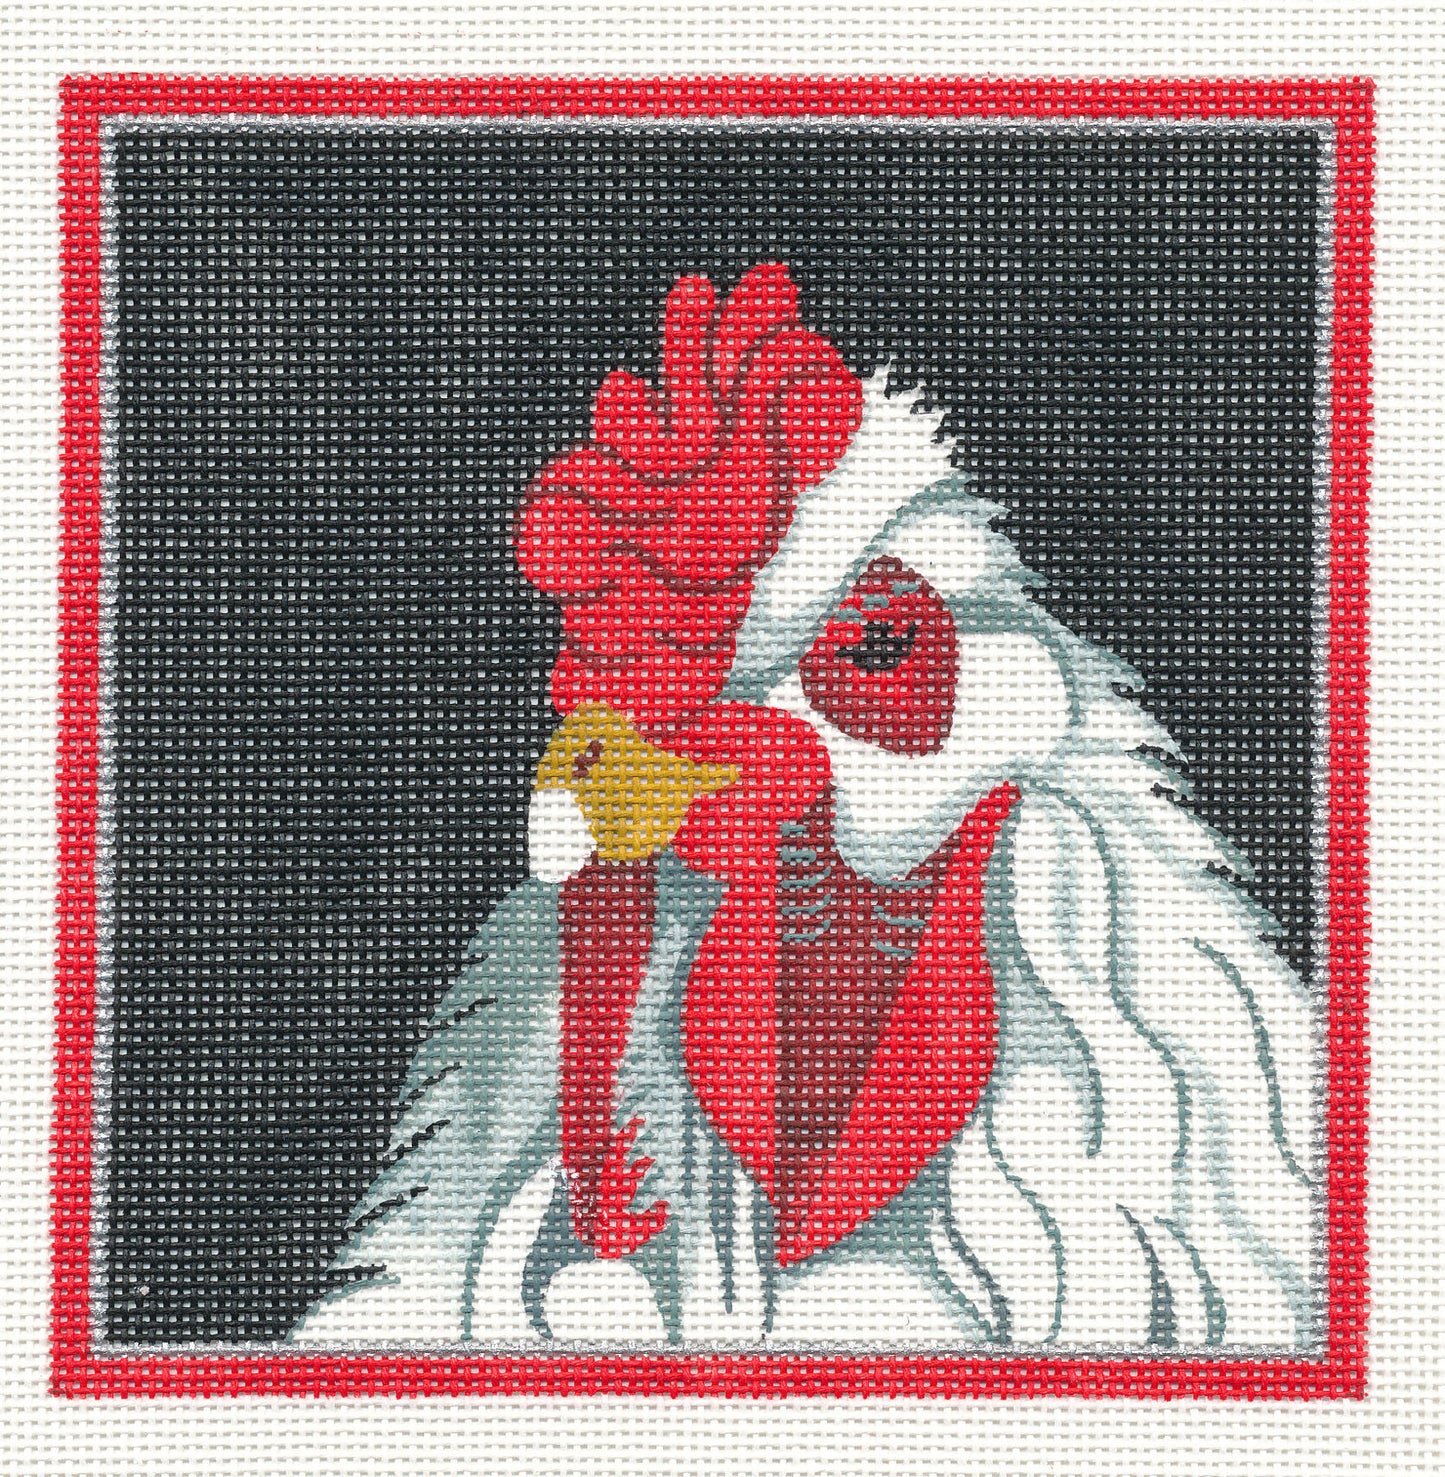 Canvas~White Chicken Square handpainted Needlepoint Canvas by Raymond Crawford